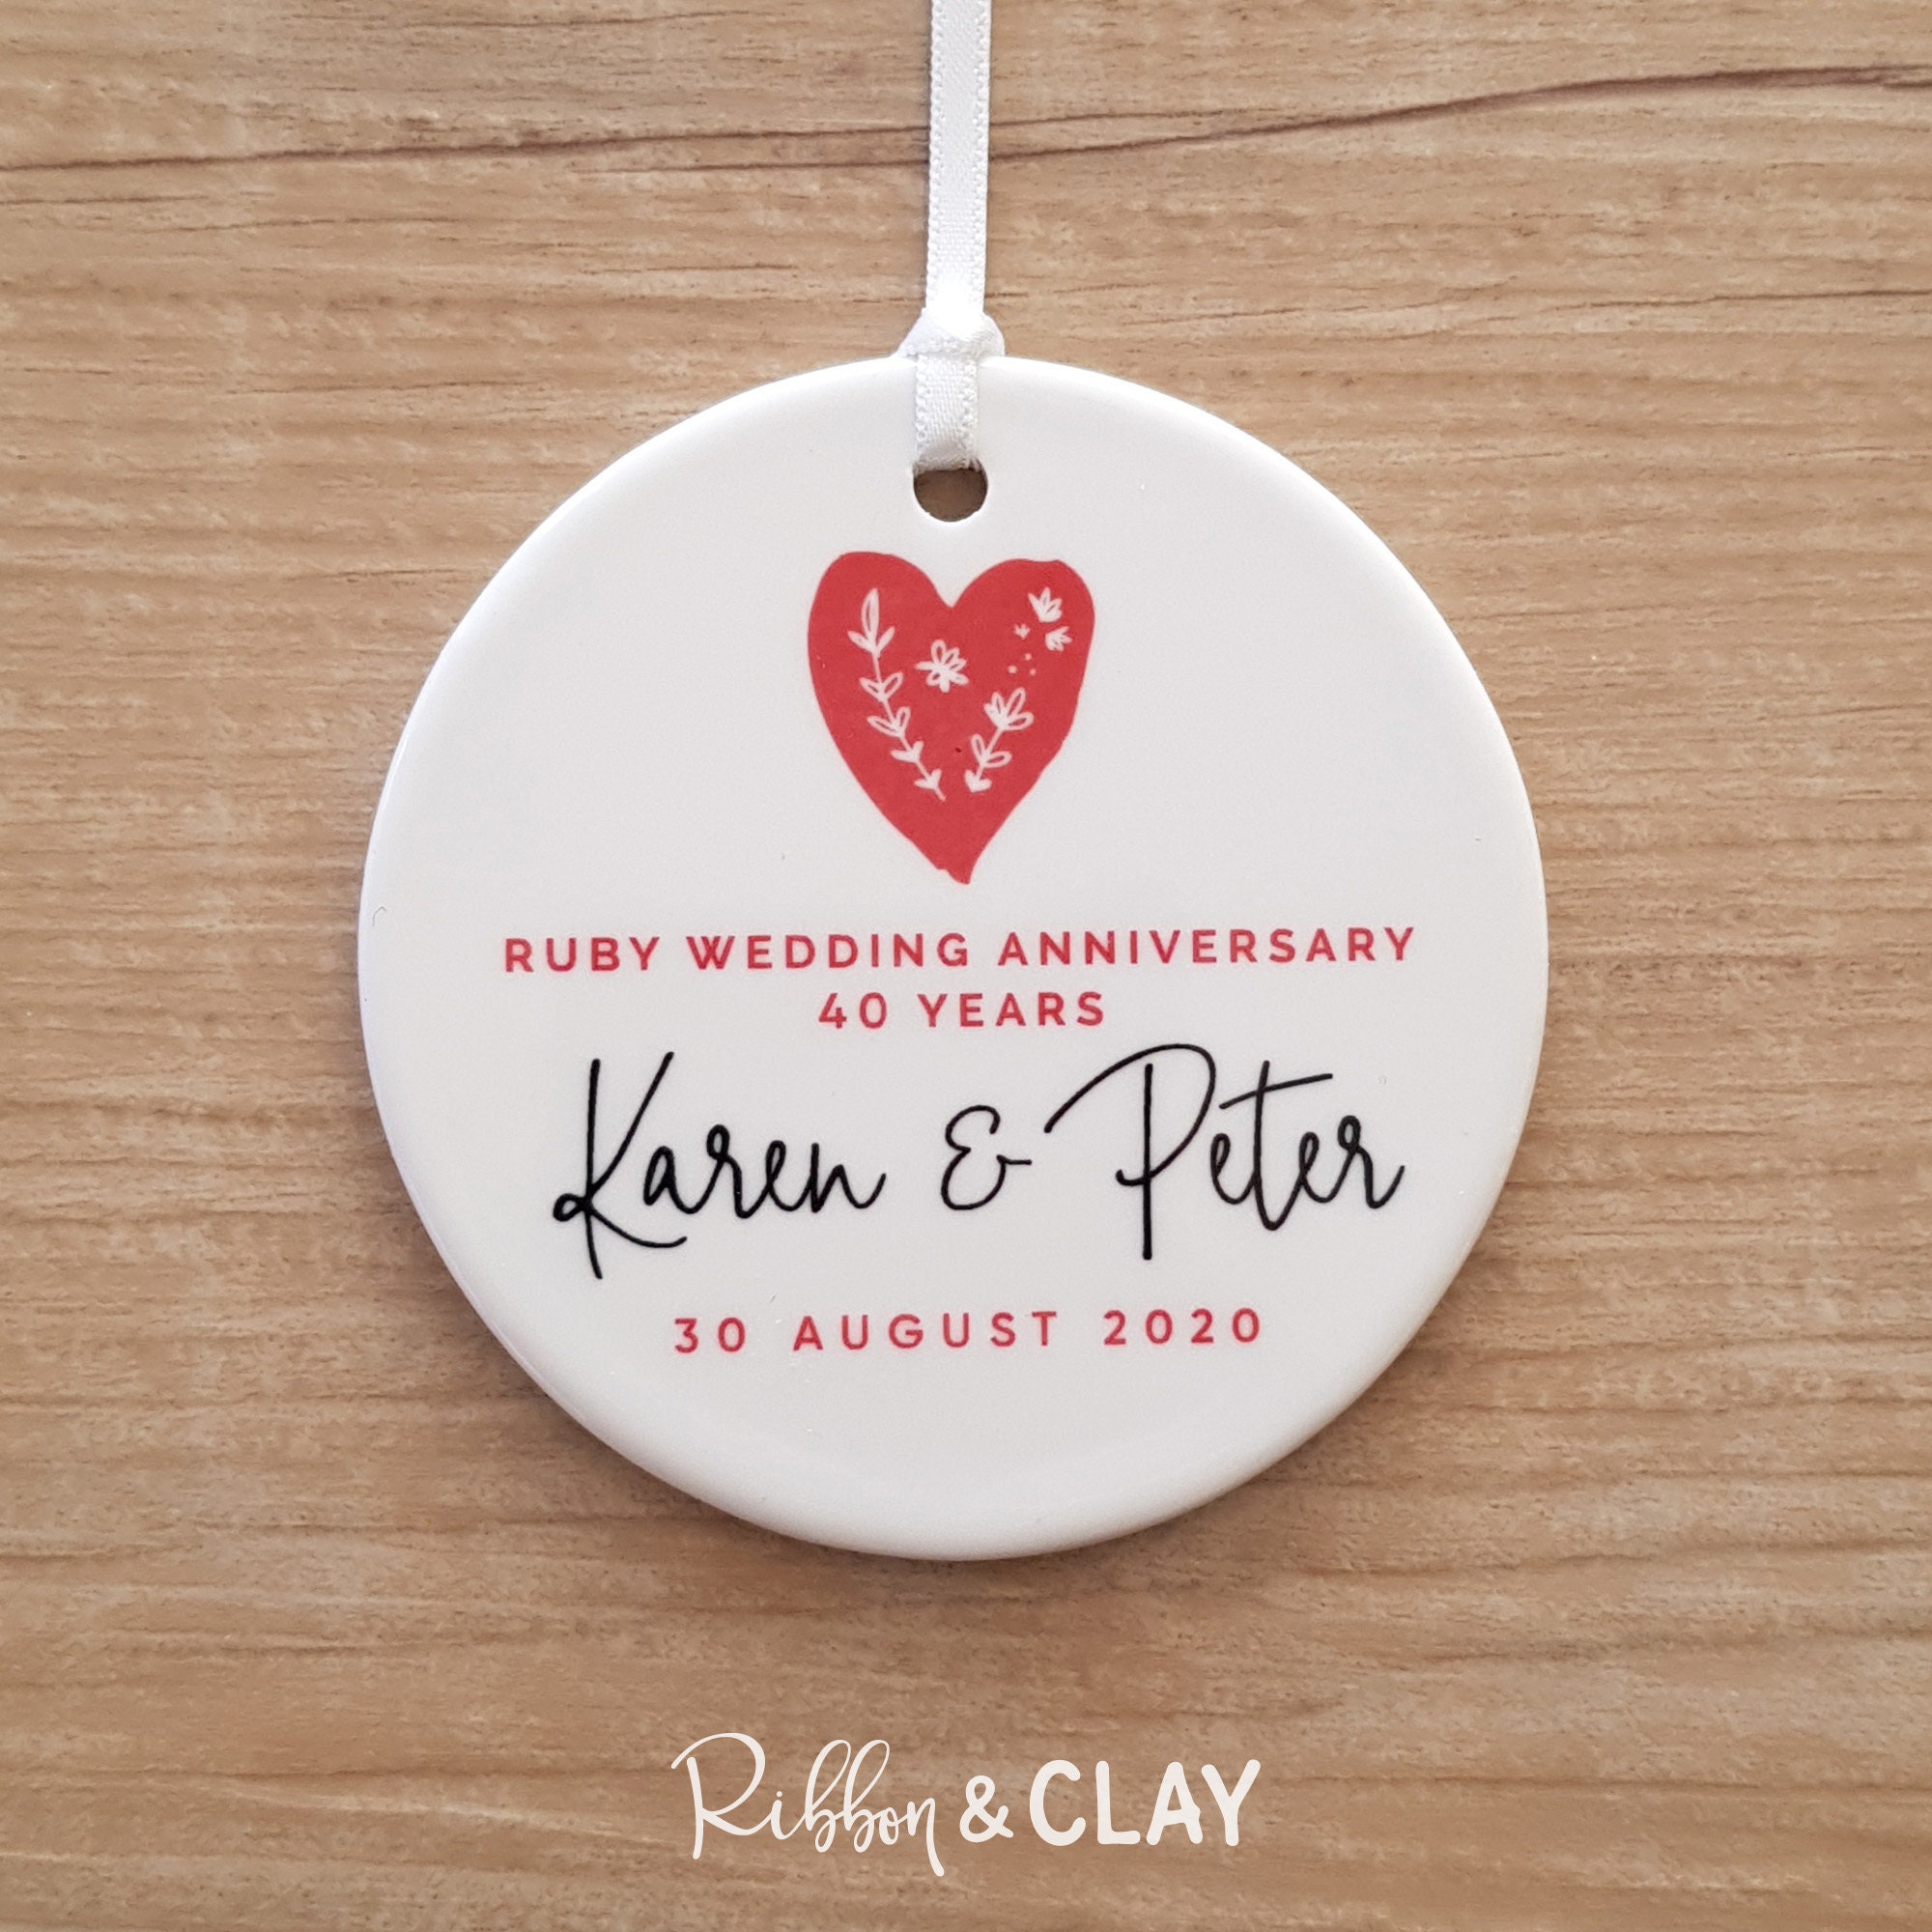  Personalized Names 40 Year Ruby Anniversary Gifts for Husband  Wife, 40th Wedding Anniversary Gifts for Couple or Parents, Custom Wooden  Christmas Ornament, Cute Wood Decorations Ideas : Handmade Products